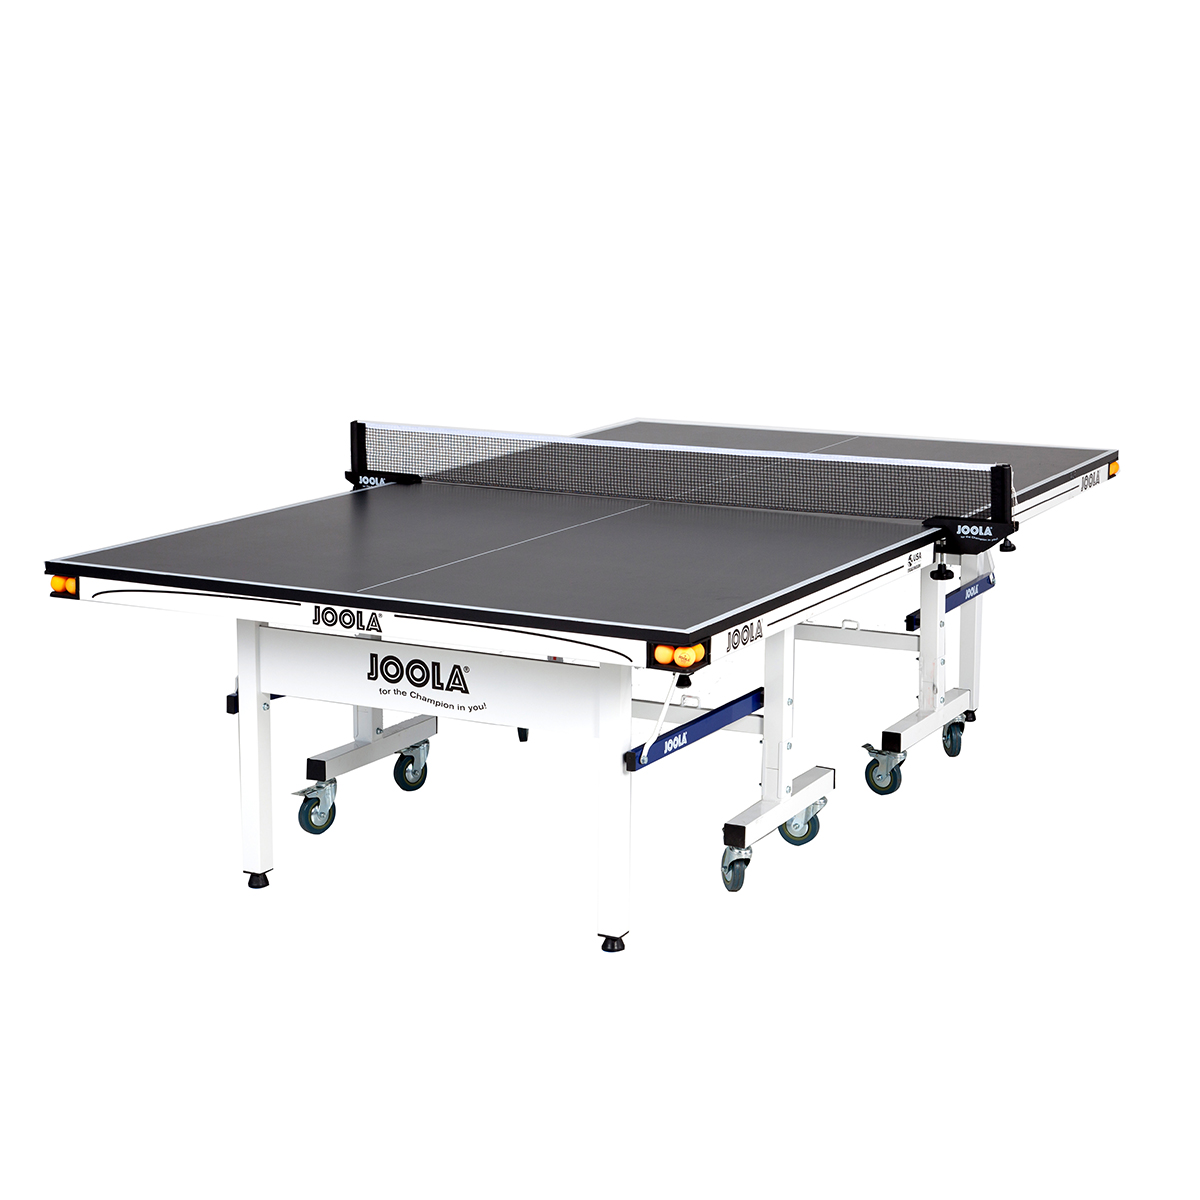 JOOLA RAPID PLAY 250 INDOOR TABLE TENNIS TABLE WITH NET SET (25MM THICK)